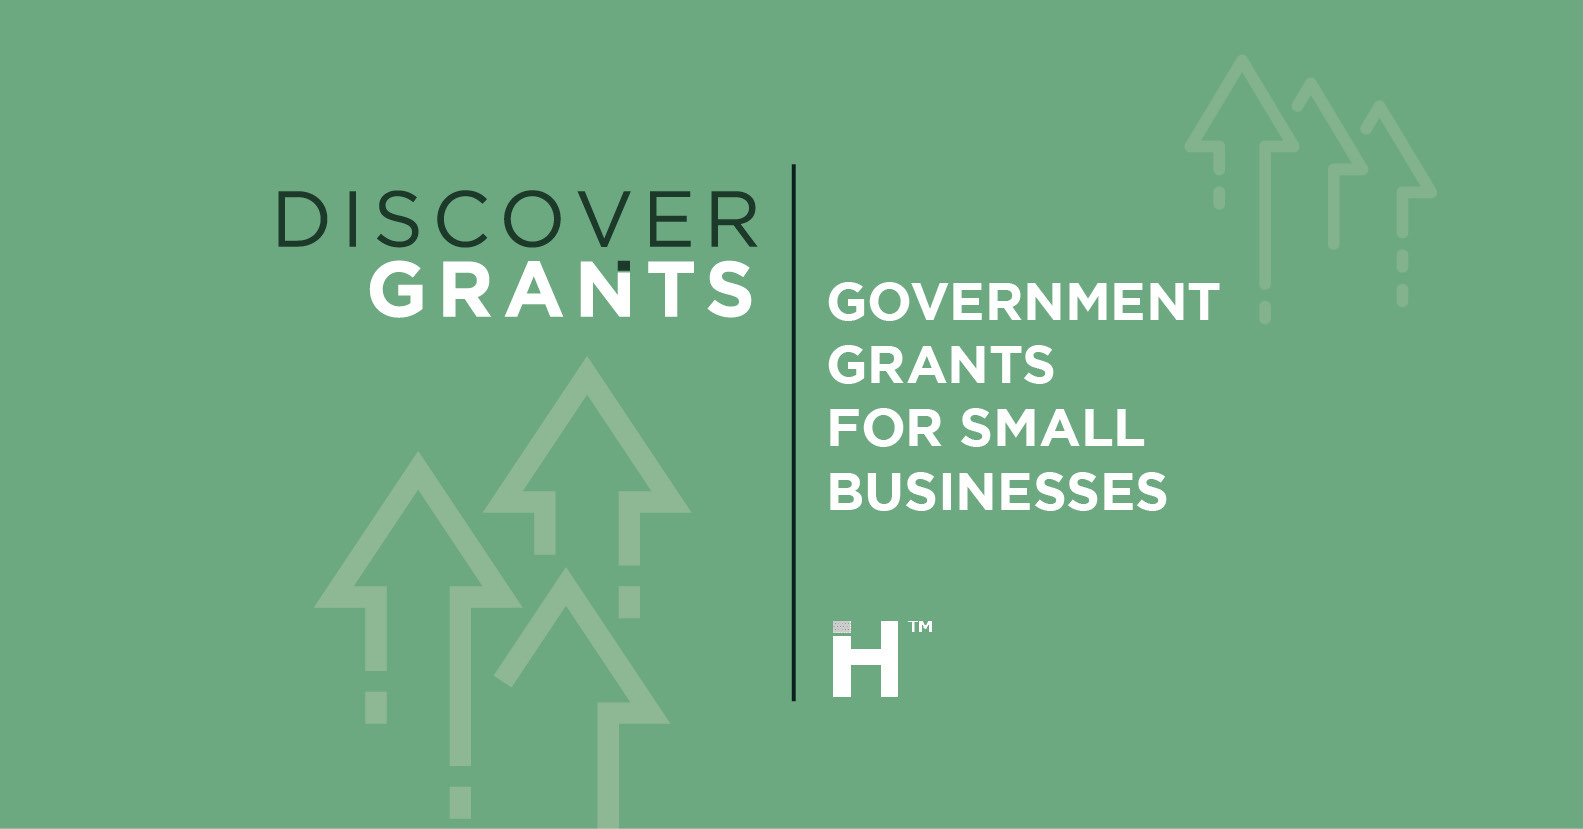 Government Grants for Small Businesses